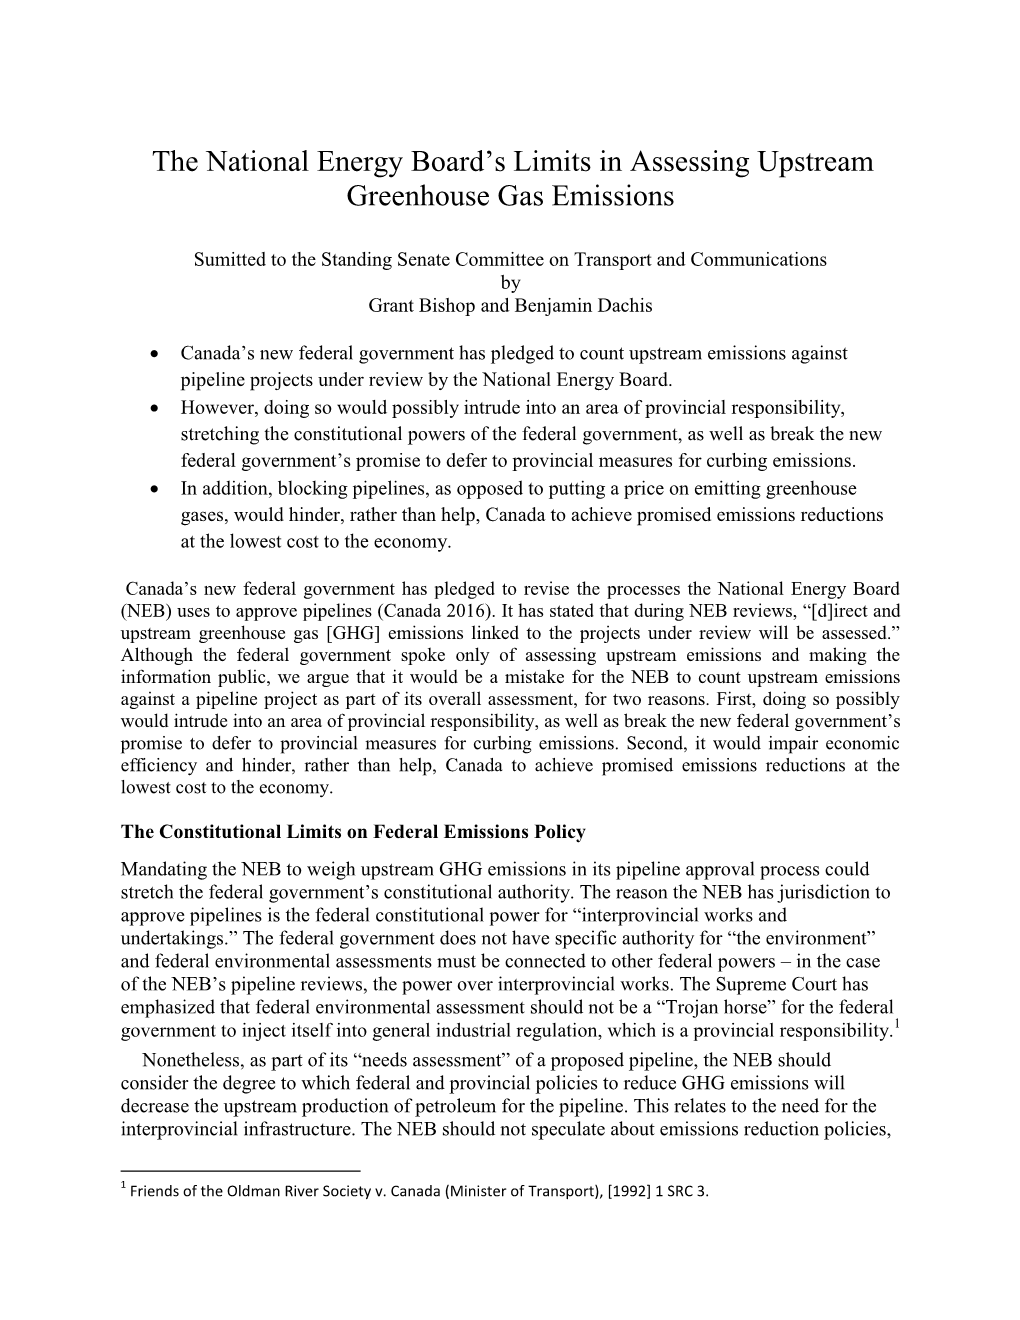 The National Energy Board's Limits in Assessing Upstream Greenhouse